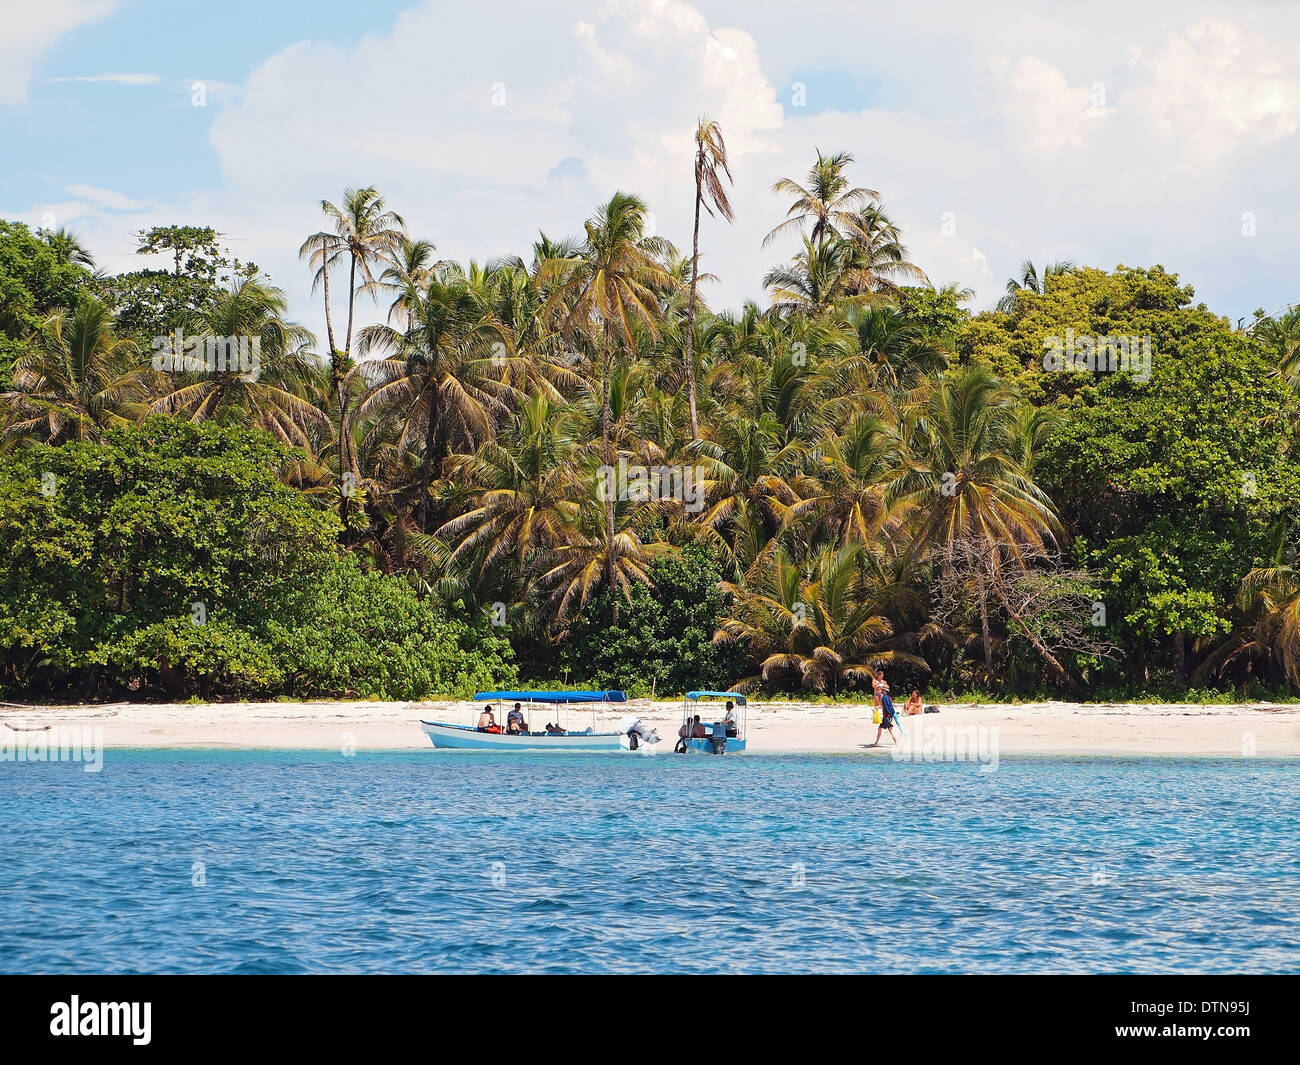 Boat tour with tourists on a tropical beach of the national park of Bastimentos, Zapatillas islands, Caribbean sea, Panama Stock Photo